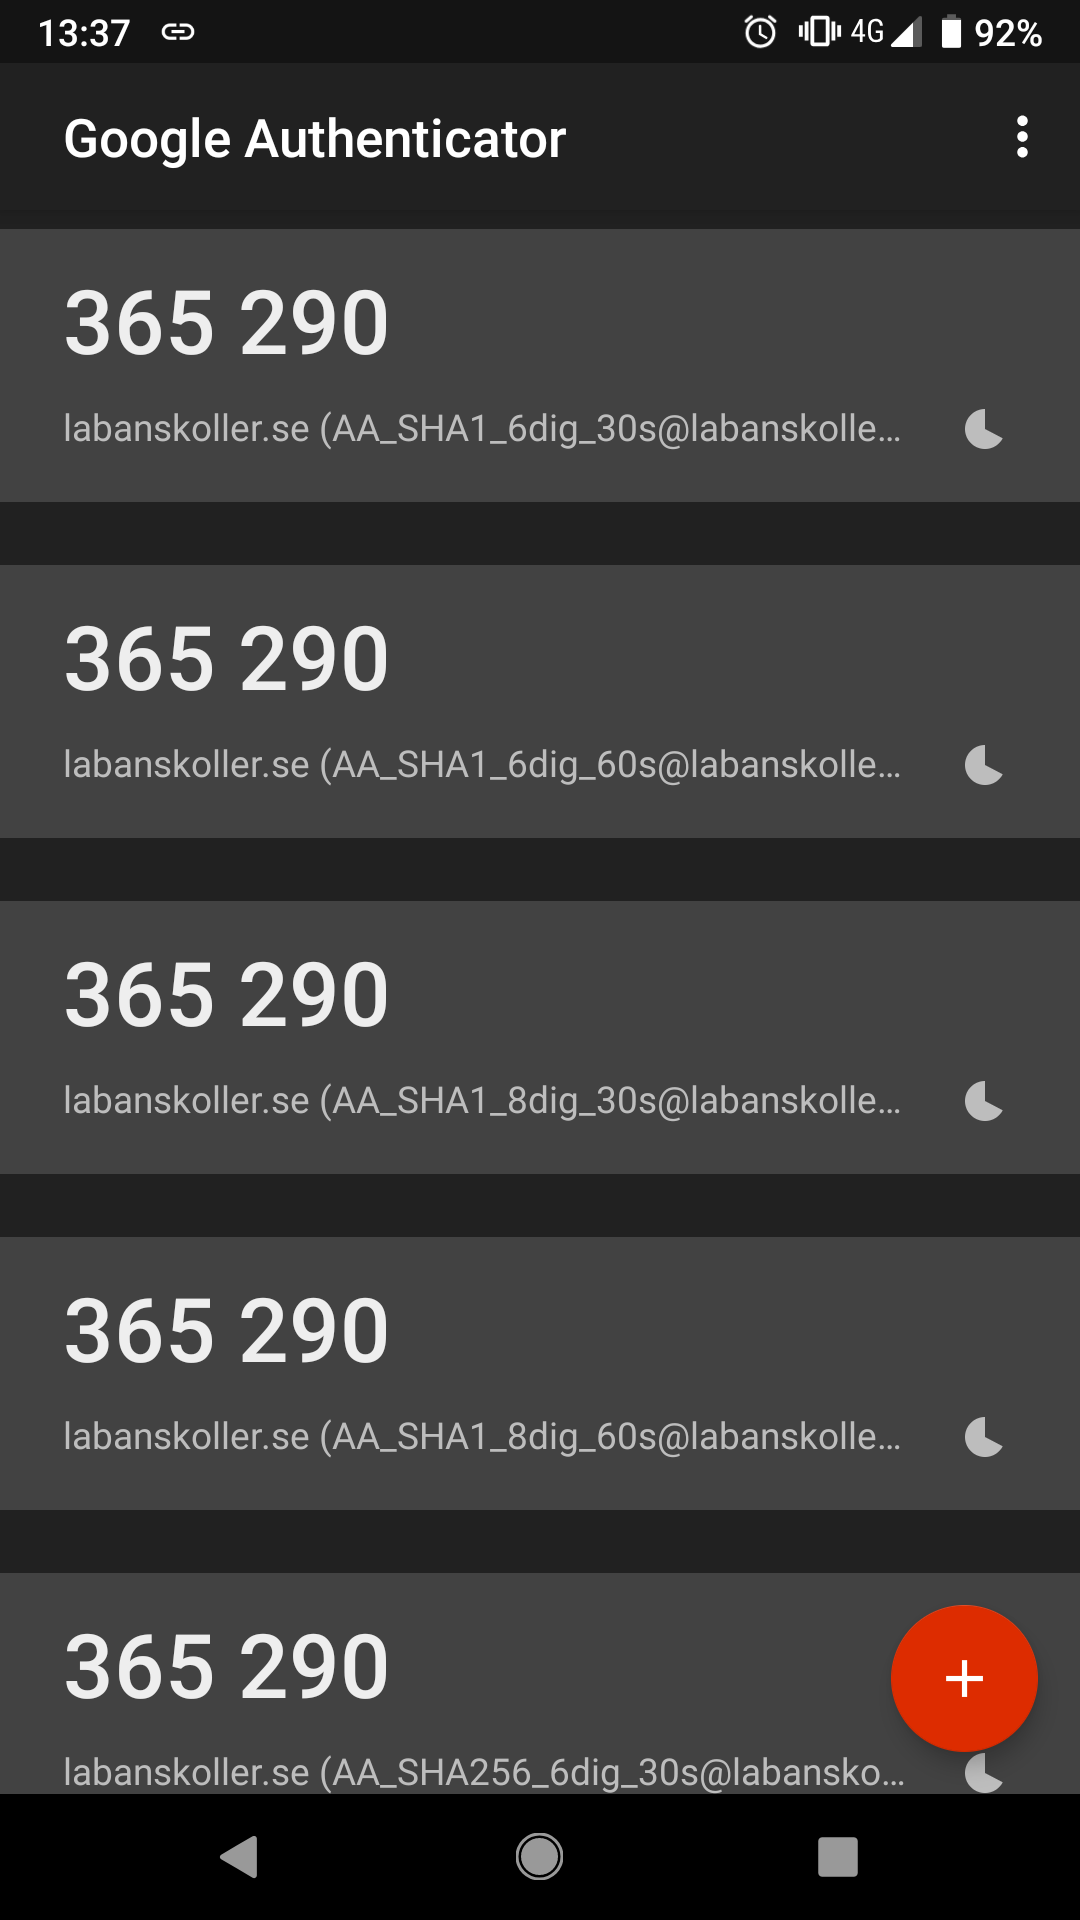 Google Authenticator showing token 365 290 for all HMAC-SHA-1 modes